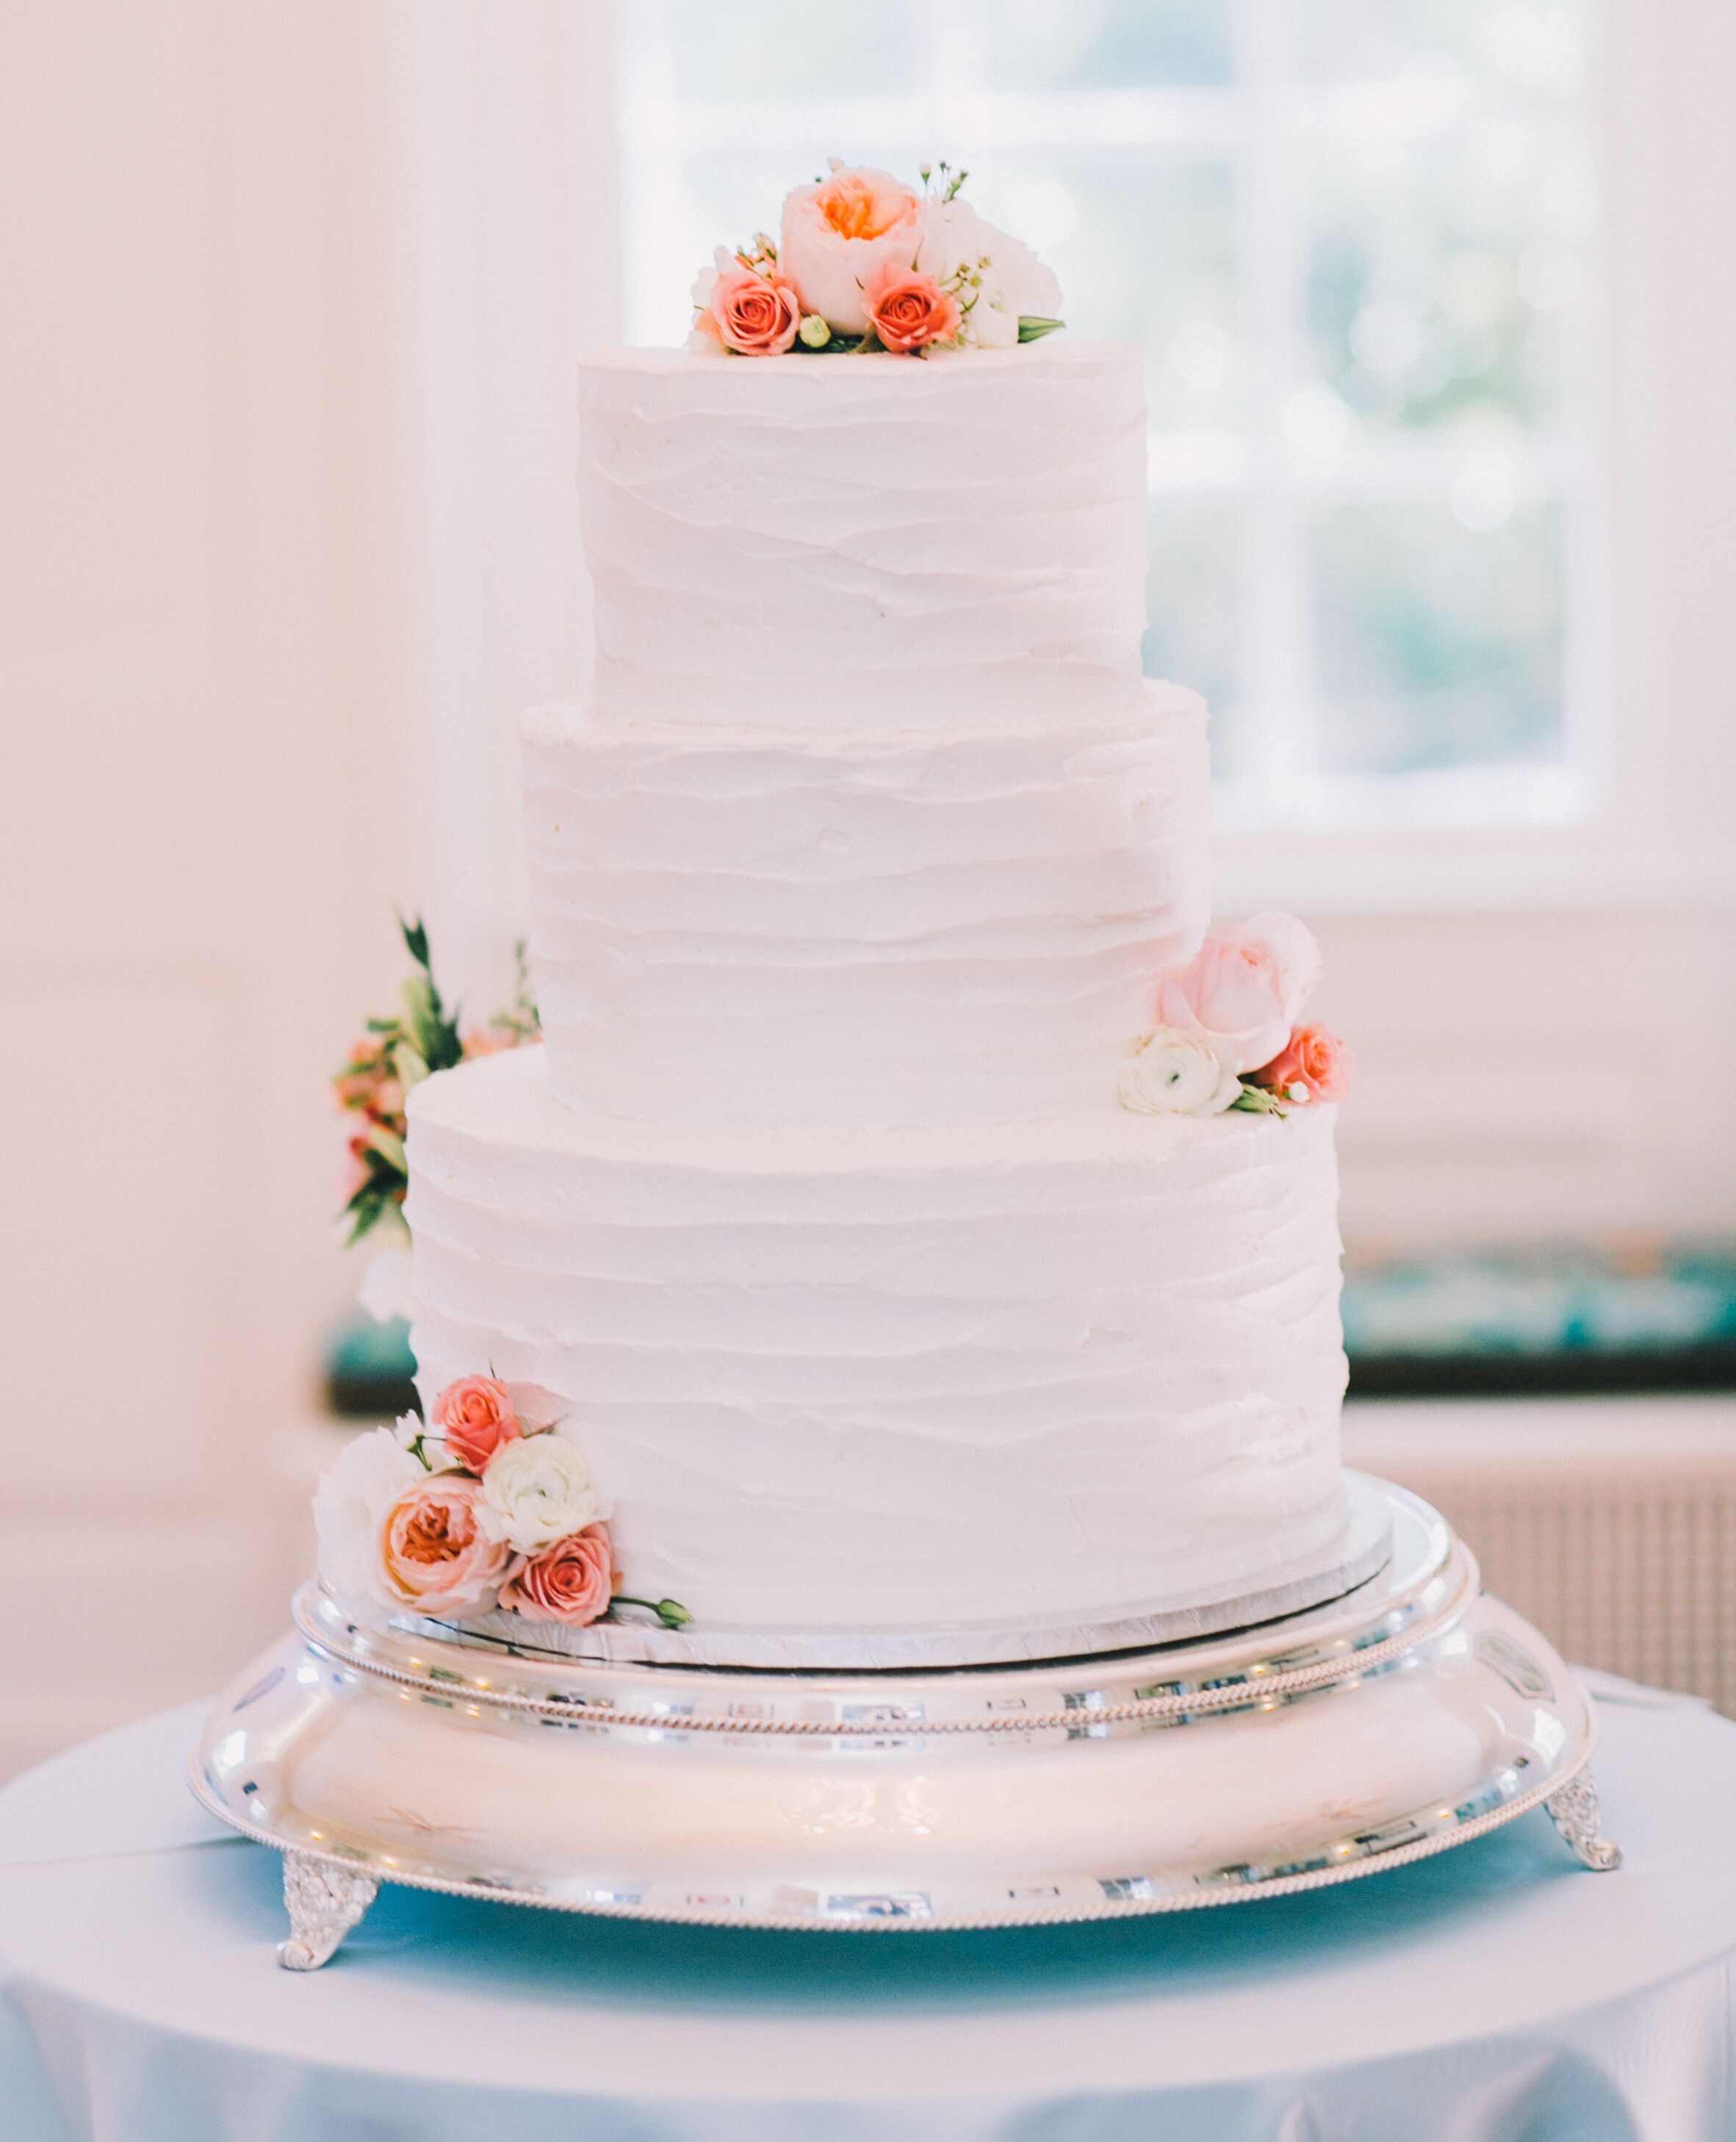 Buttercream Wedding Cake With Strawberry and Vanilla Mousse Filling